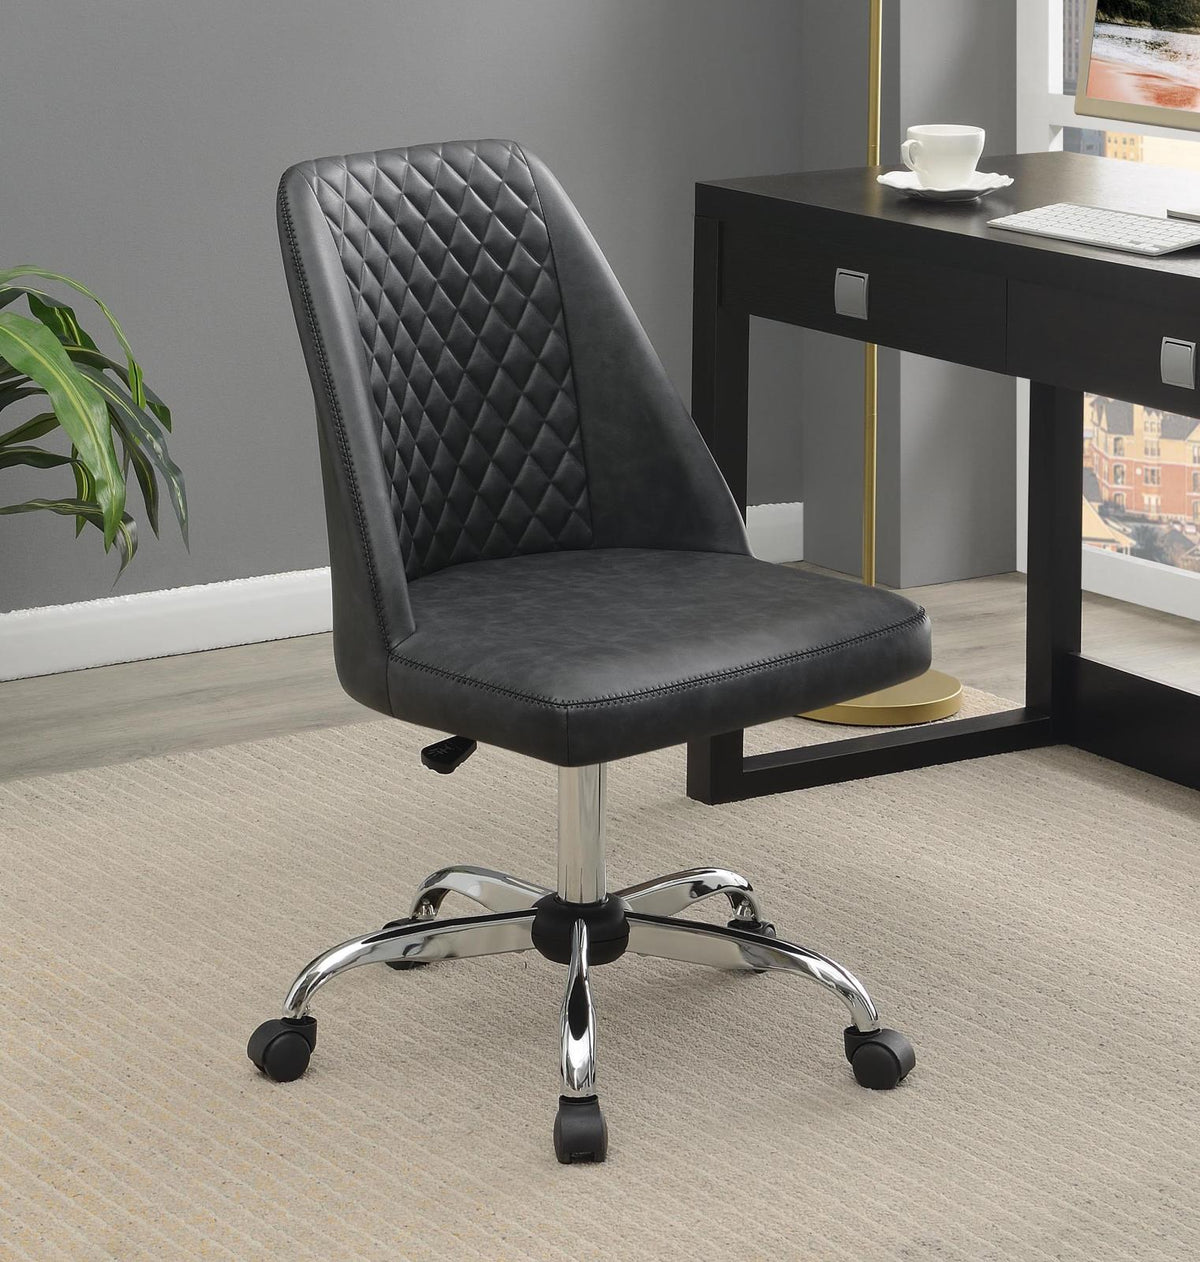 Althea Upholstered Tufted Back Office Chair Grey and Chrome  Half Price Furniture